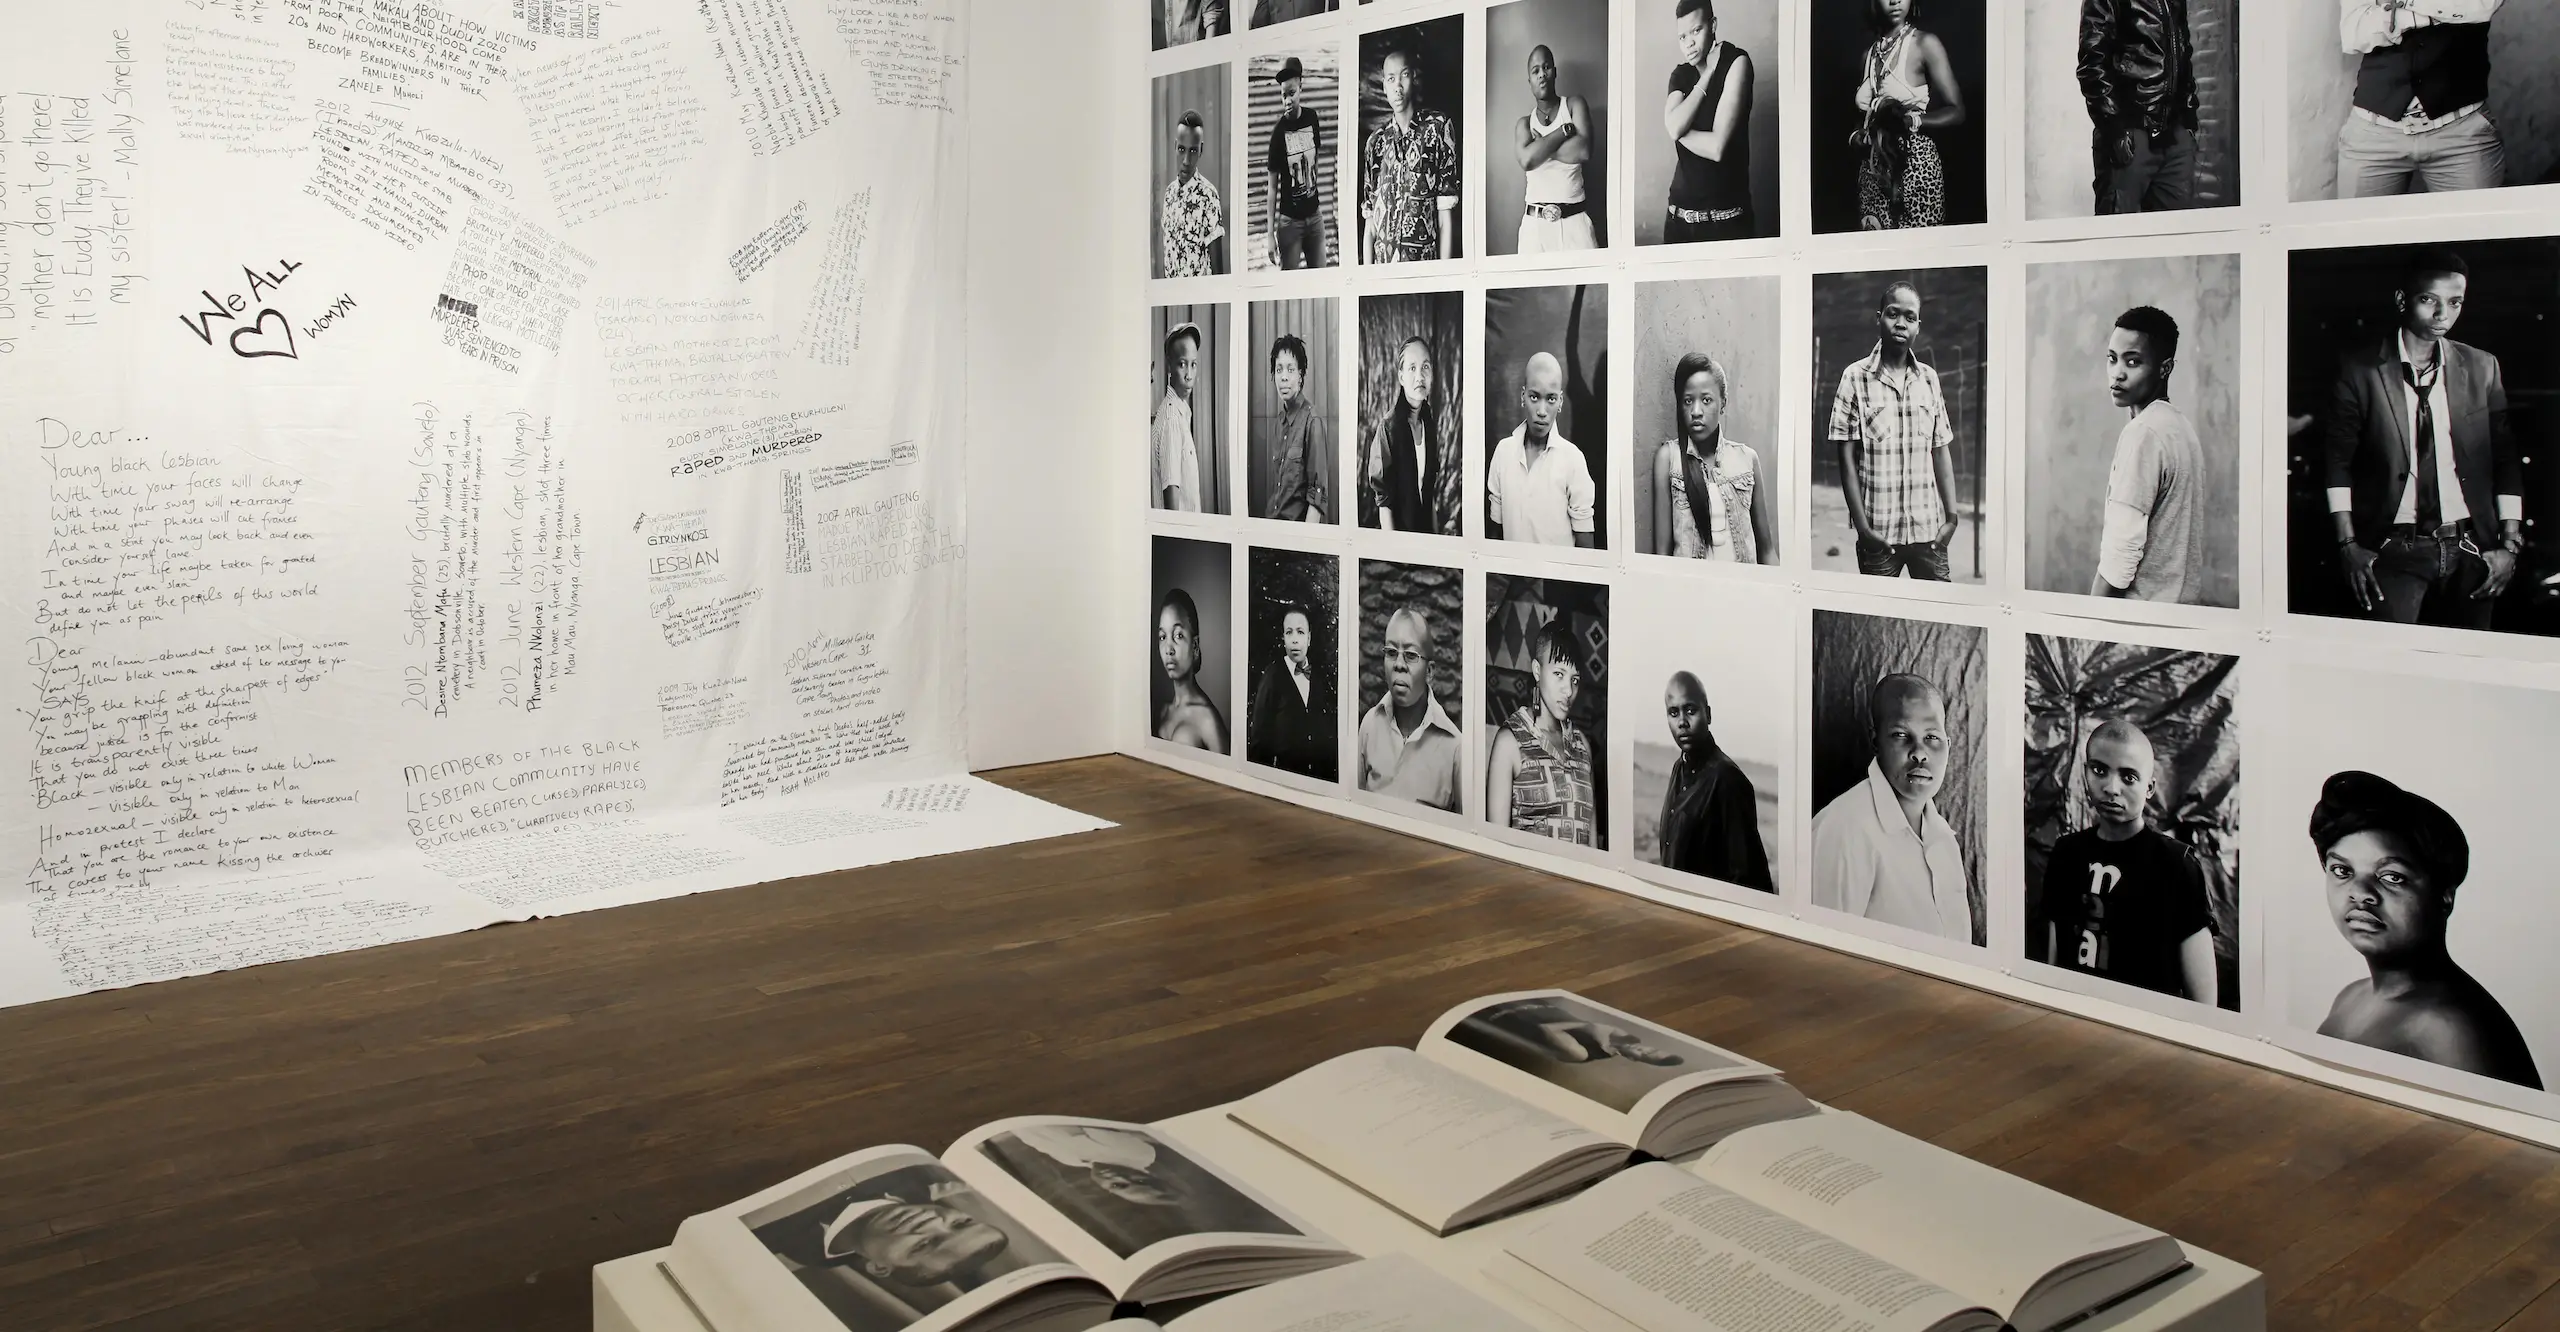 The corner of an exhibition space with a photography book on a plinth in the foreground, black and white portrait photographs along one wall and handwriting on a white background along the other wall. 